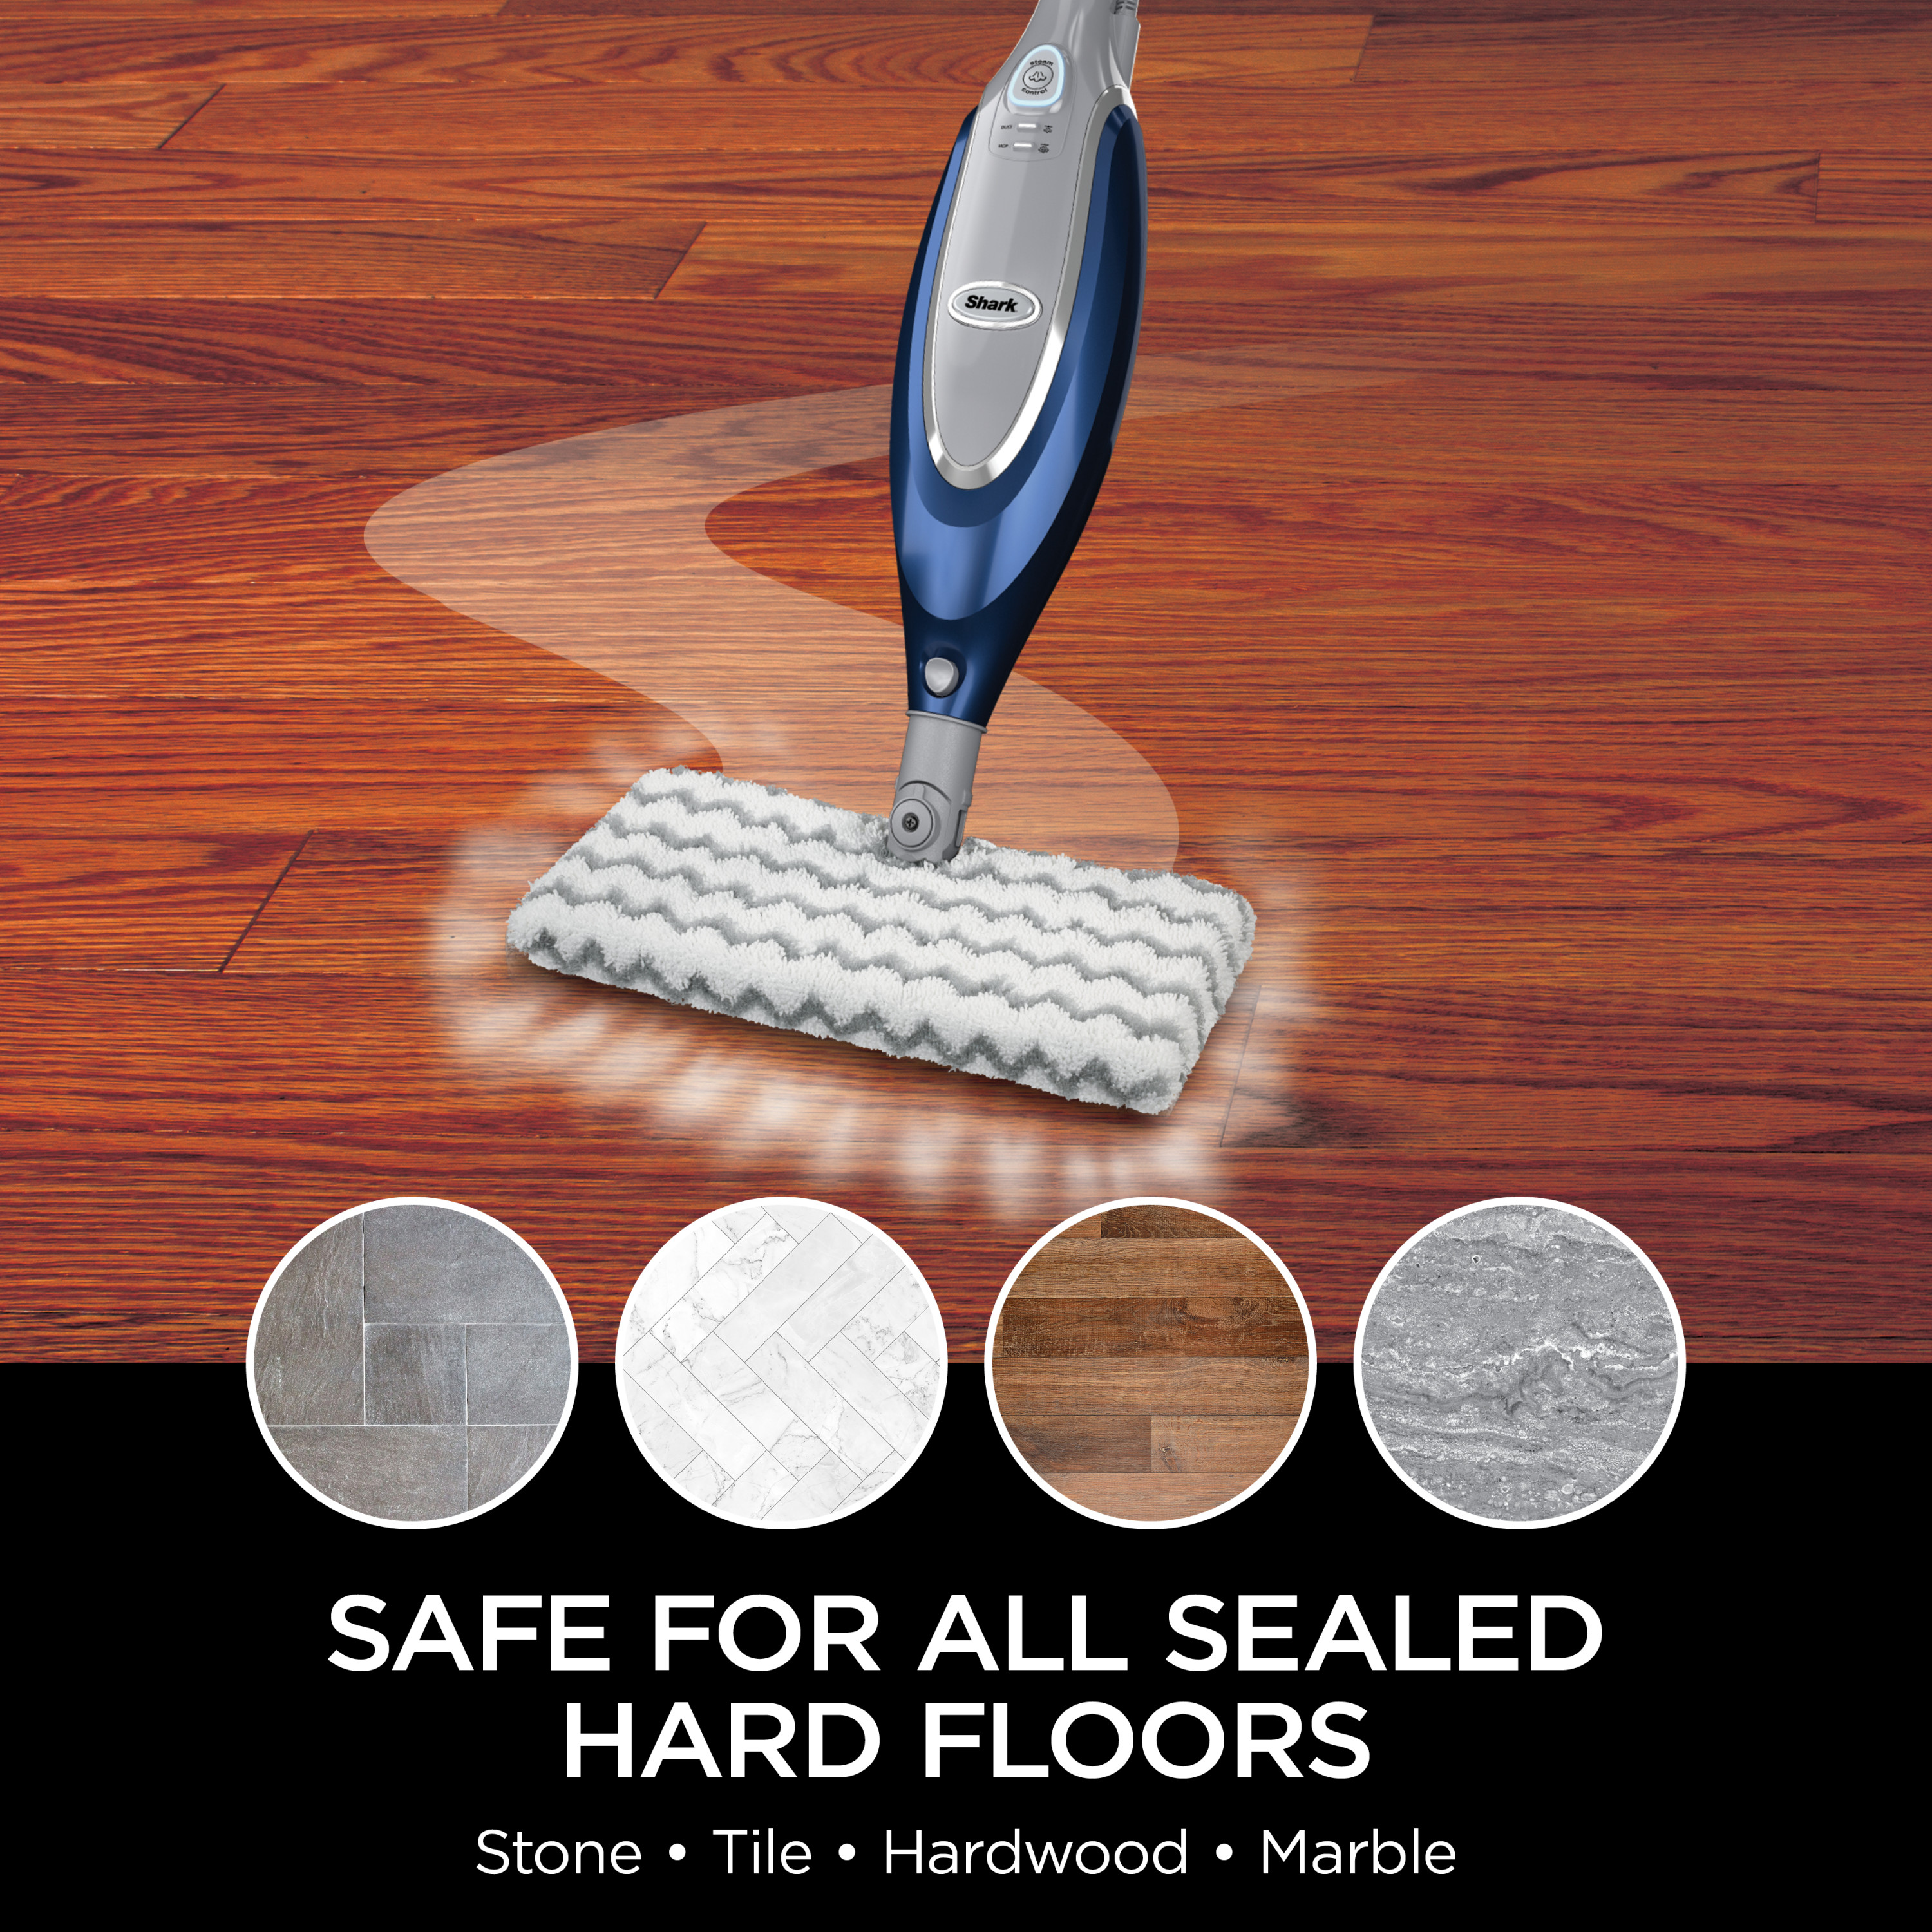 Shark® Professional Steam Pocket® mop for hard floors, deep cleaning, and sanitization, SE460 - image 5 of 10